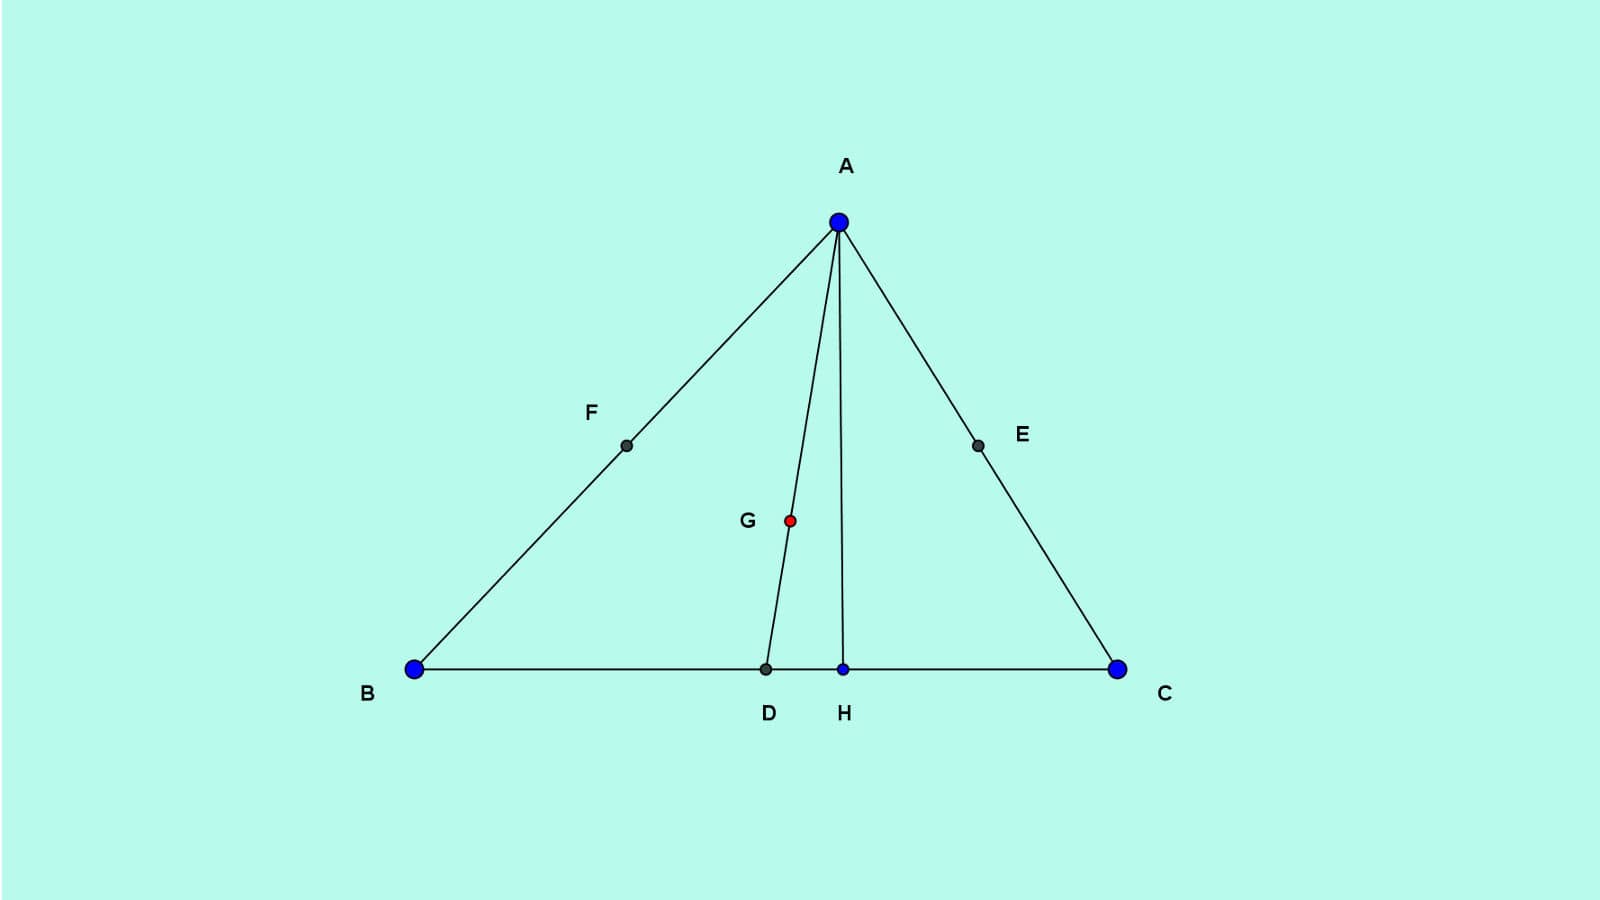 Relation between median and sides of triangle